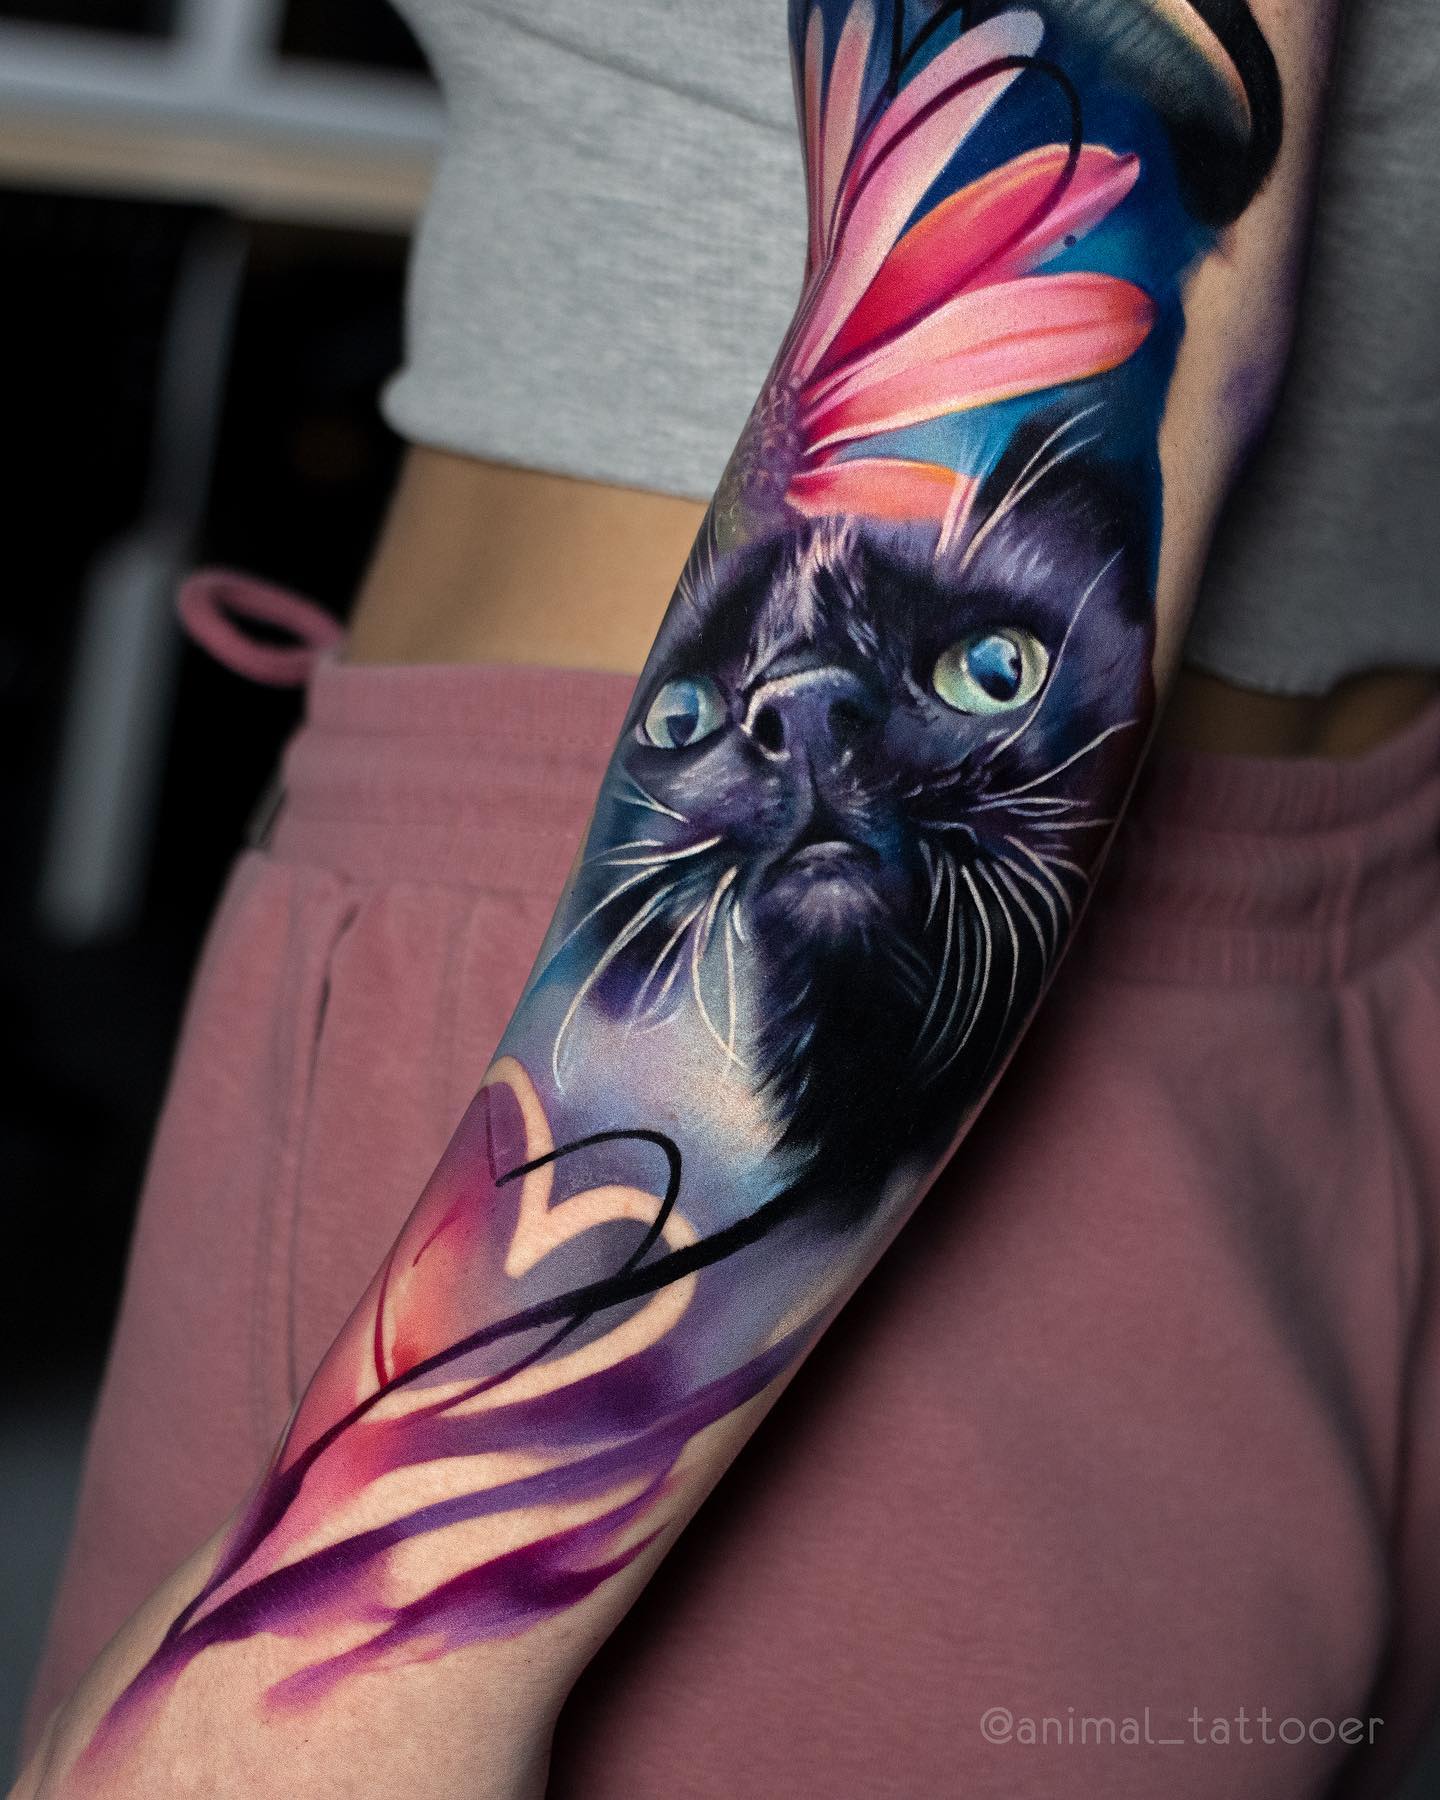 Vibrant Cat Tattoo with Floral Elements on Forearm